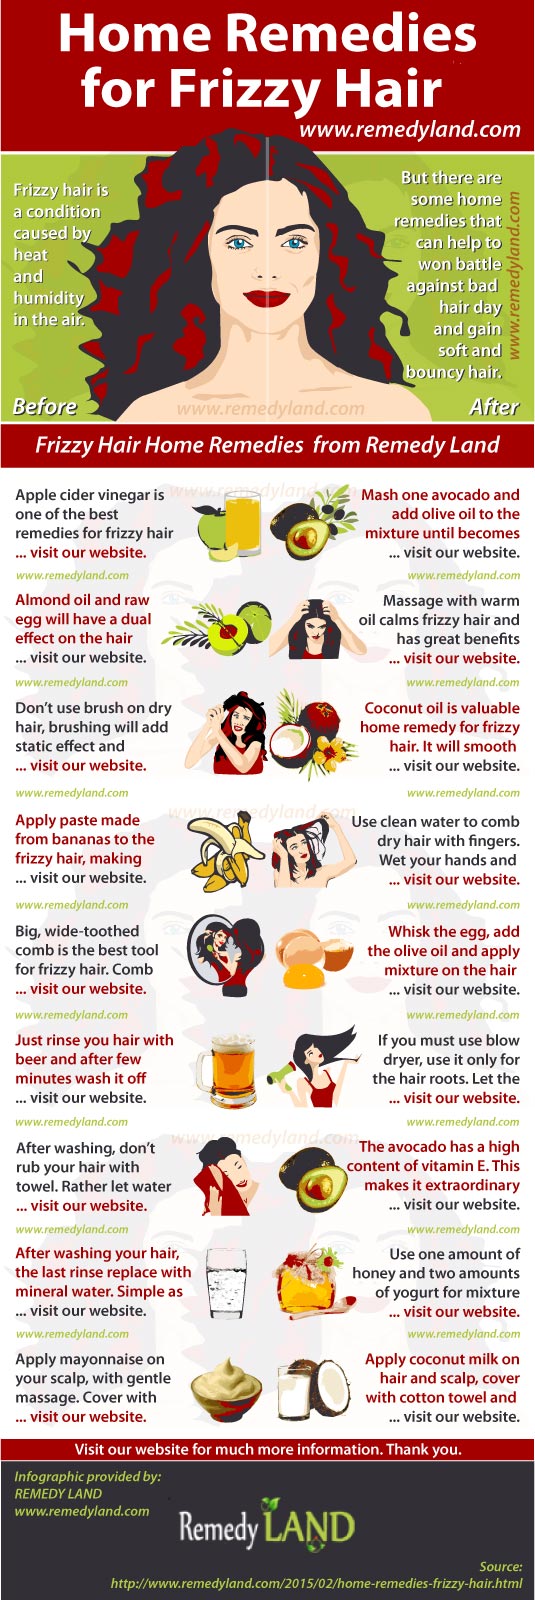 Frizzy Hair Home Remedies for Managing a Dry, Brittle, Unruly Hair - Remedy  Land